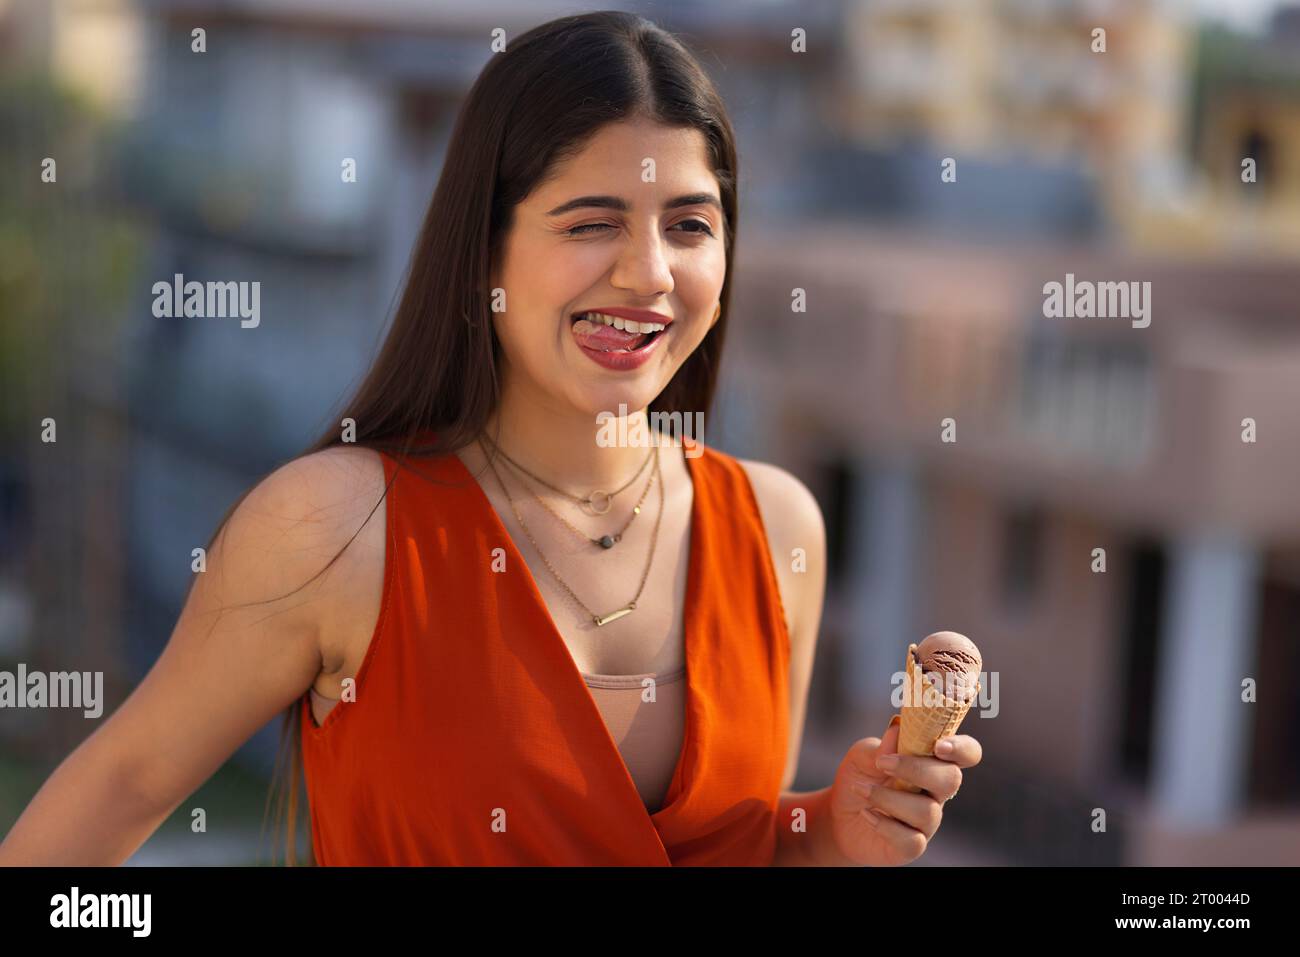 Portrait of young woman eating ice cream in cone Stock Photo